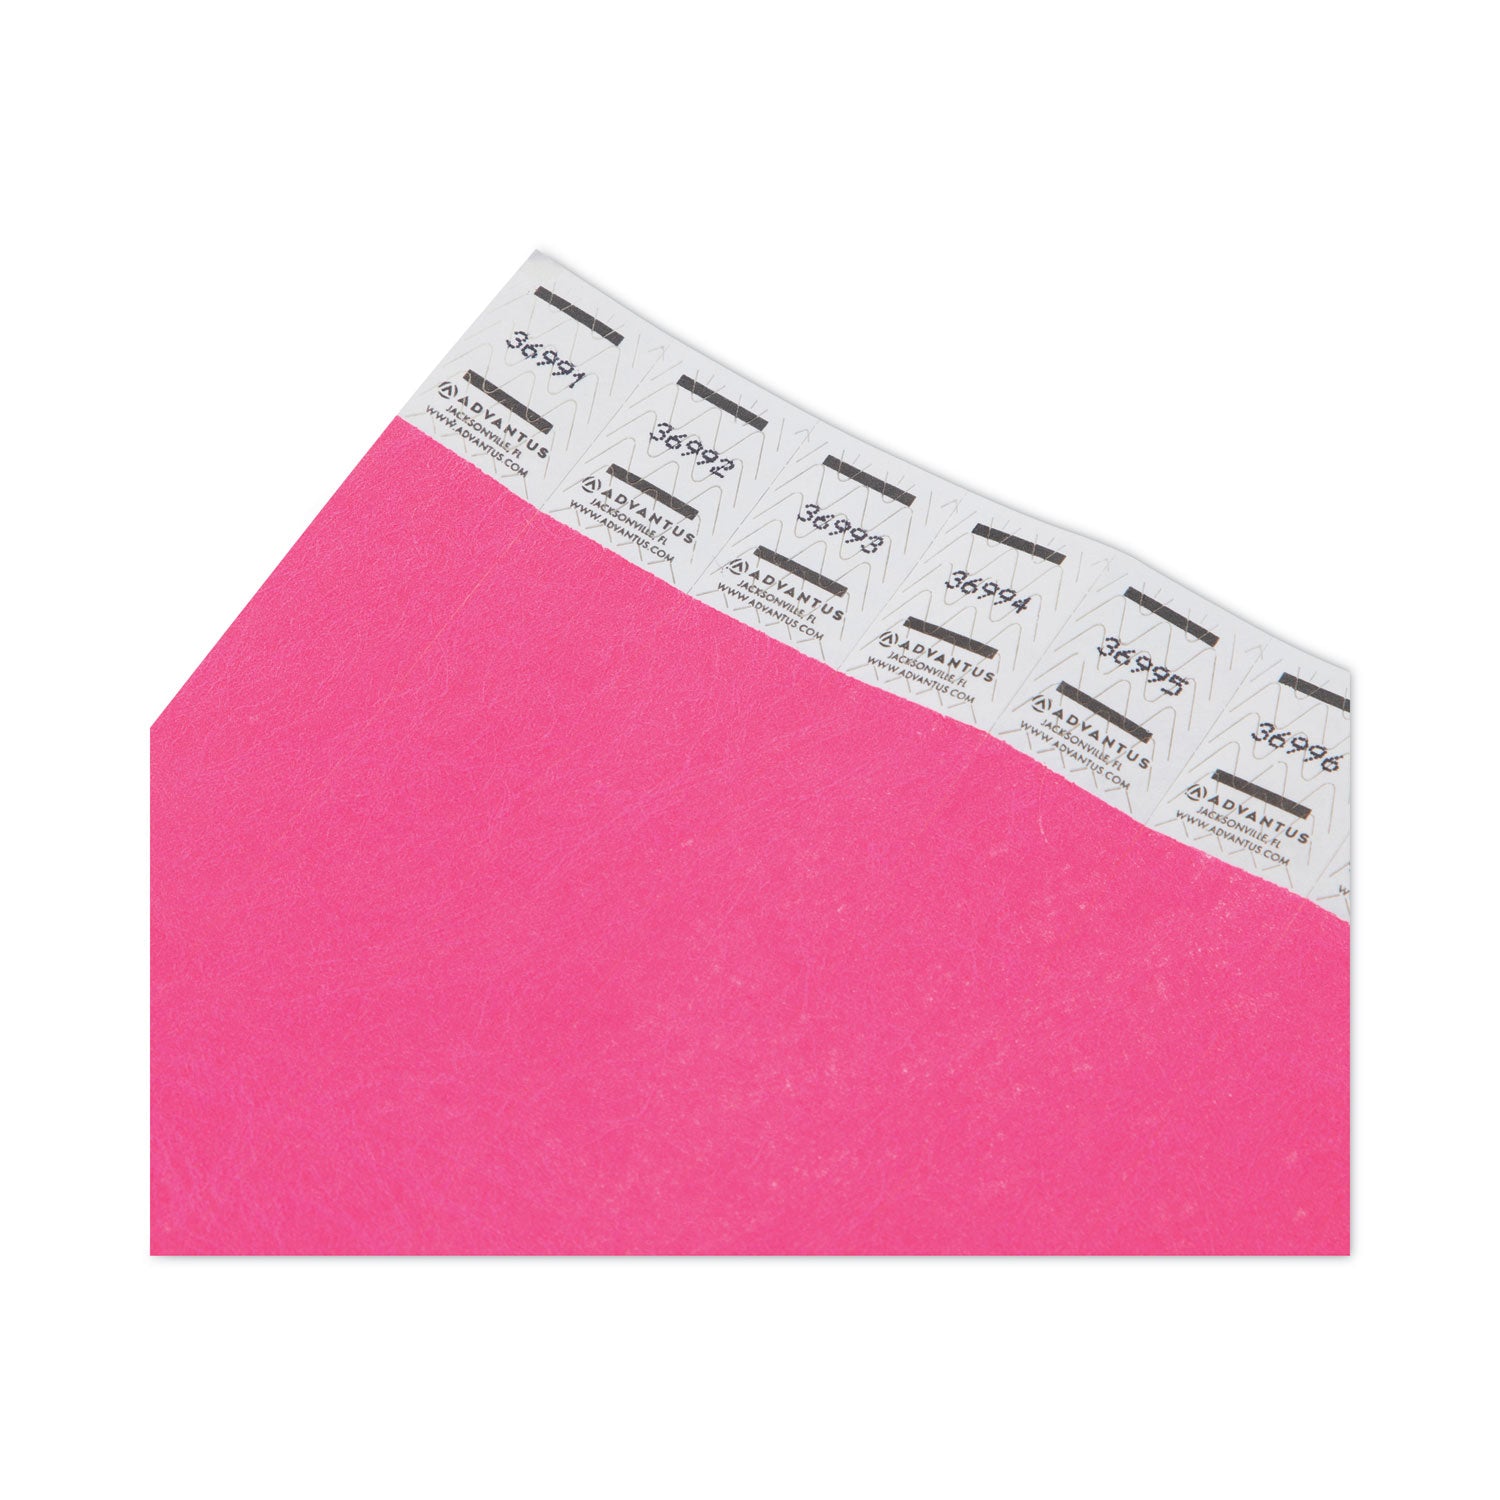 crowd-management-wristbands-sequentially-numbered-975-x-075-neon-pink-500-pack_avt91121 - 3